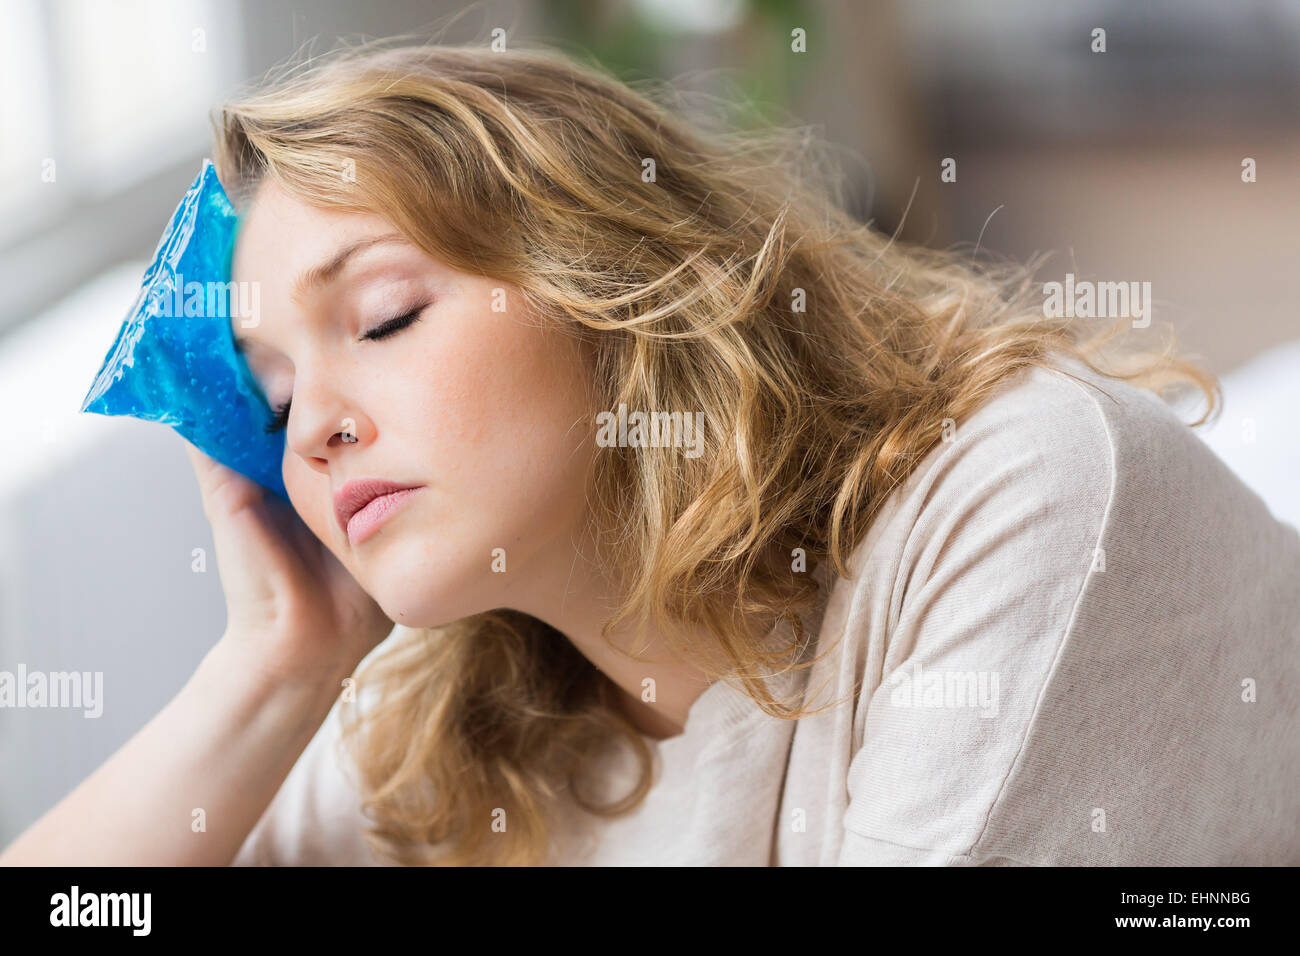 Woman using a hot-cold gel pack treatment to releive pain. Stock Photo